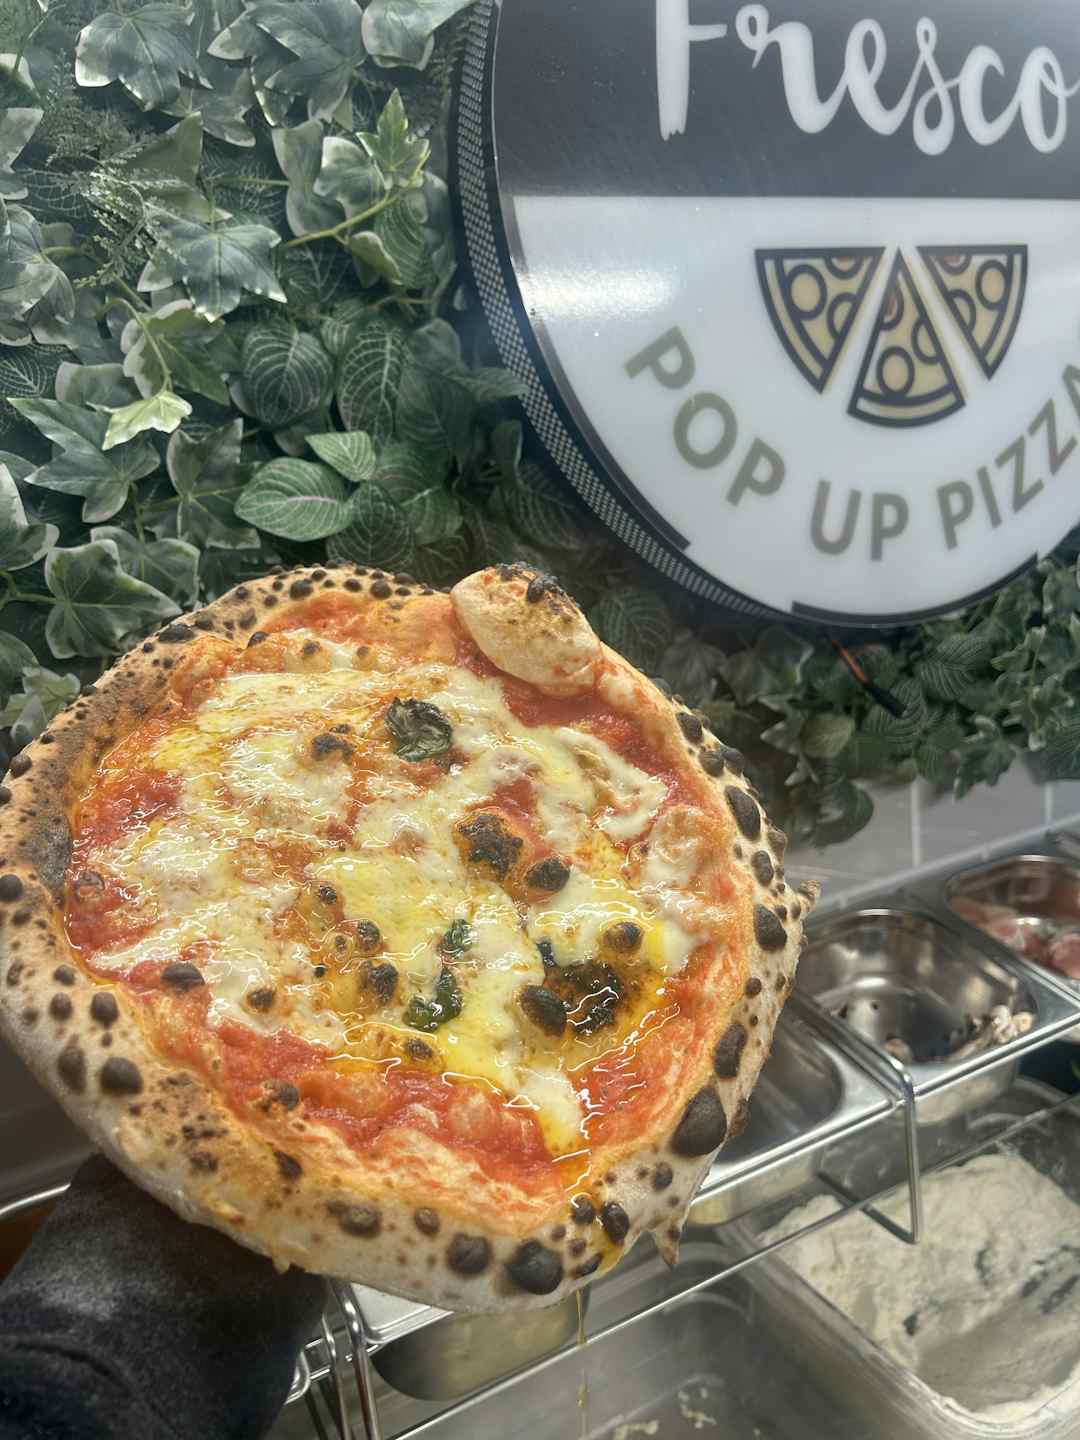 Hero image for supplier Velocefresco Pop Up Pizzas